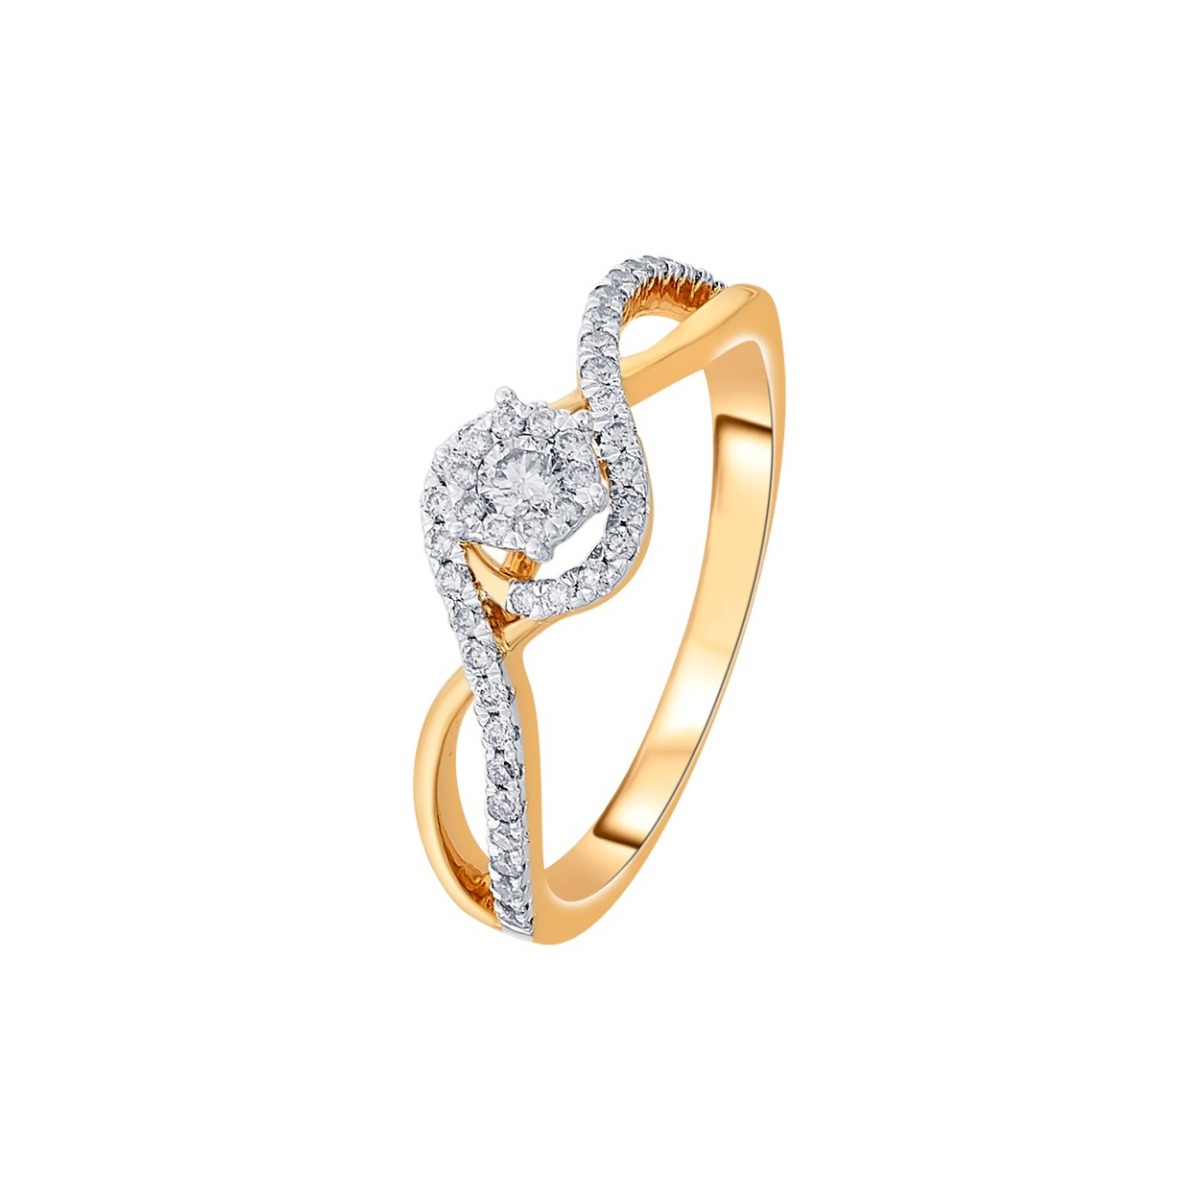 Buy Attractive Diamond and 14KT Rose Gold Ring Online | ORRA